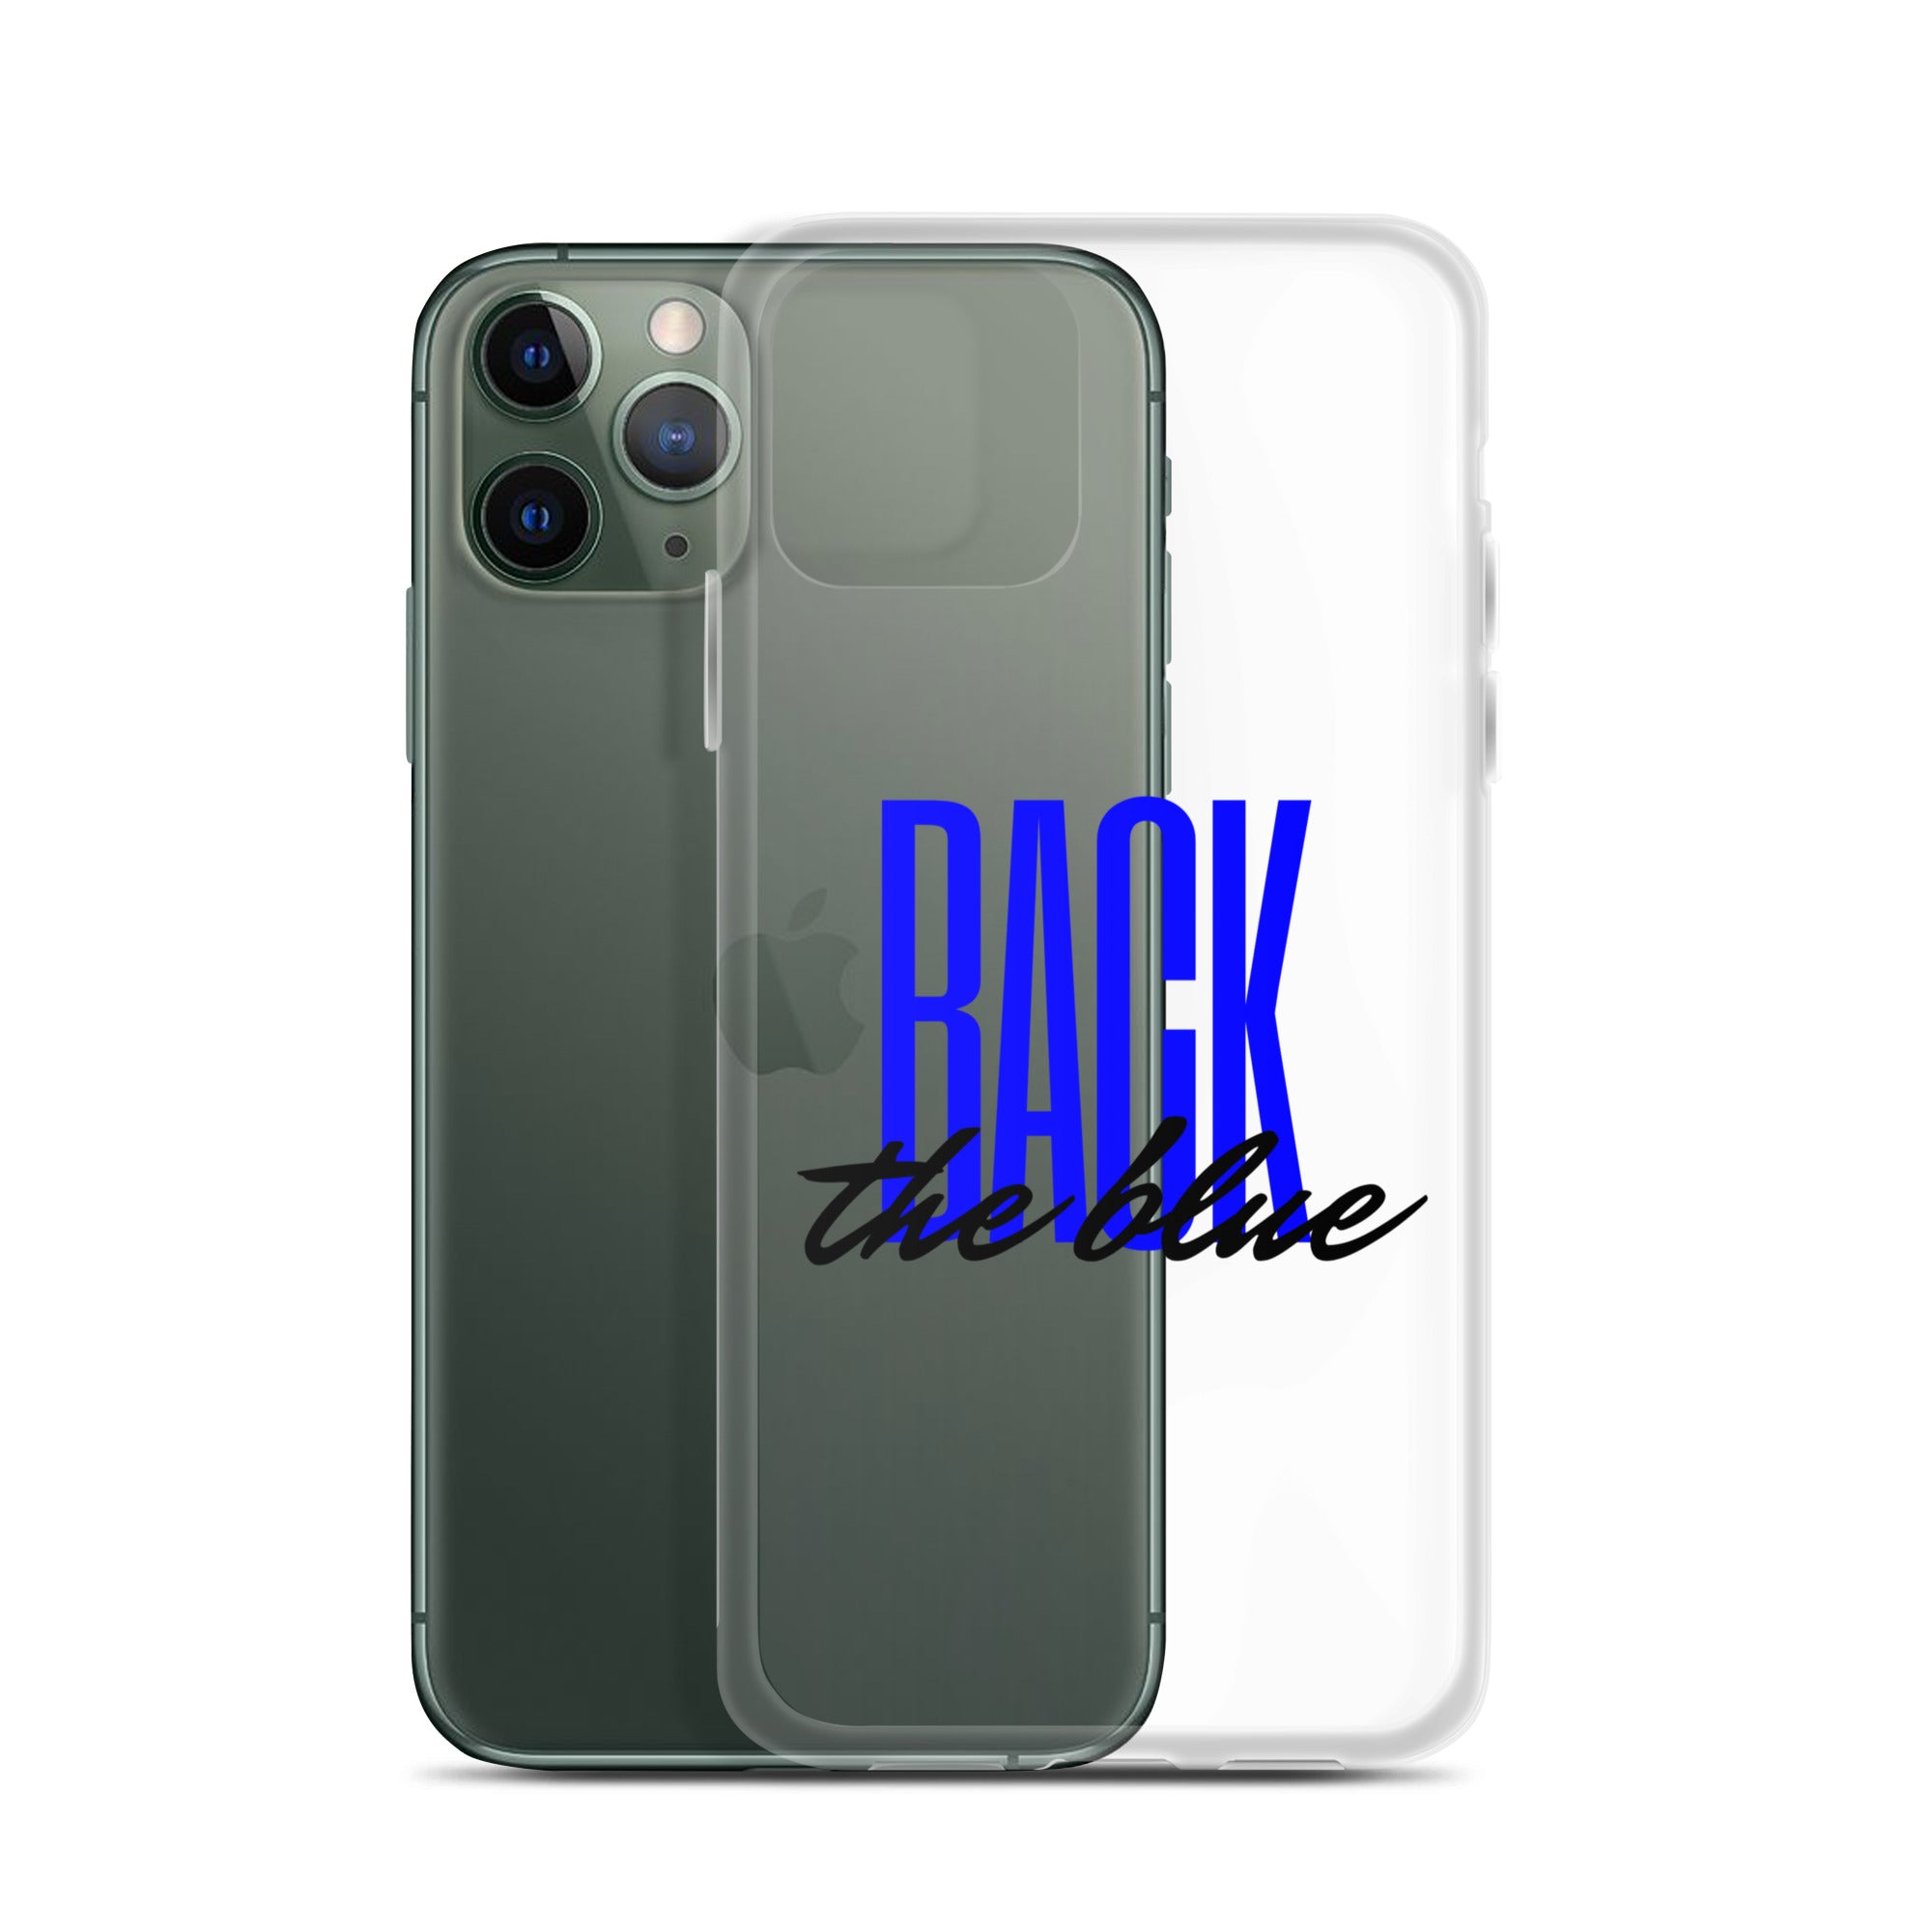 Back the blue (Black text) iPhone Case